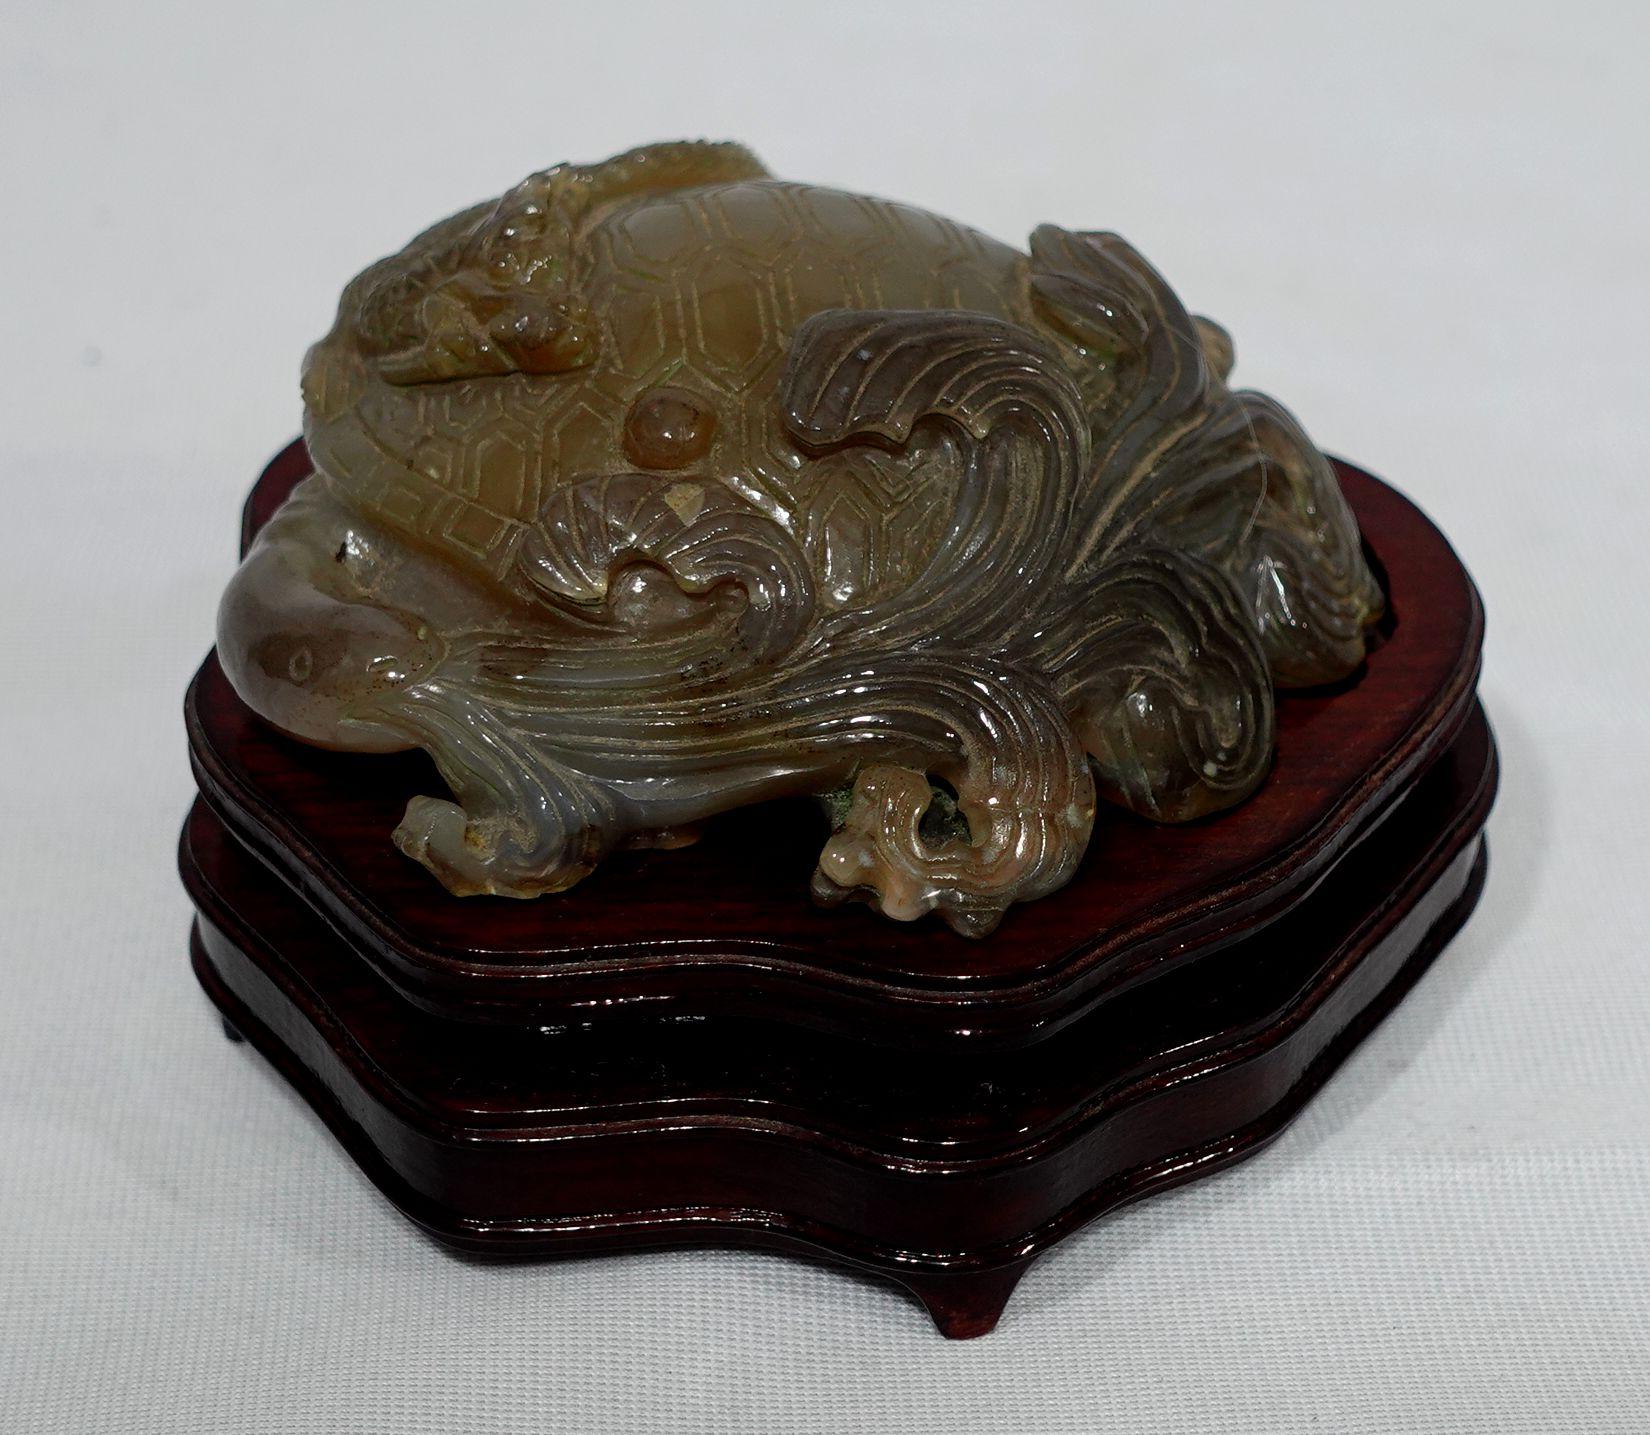 A fine and beautiful Carved Agate Animal Group depicts a turtle, dragon, and cloud with sea waves. rest on a fitted wooden base. A large and heavy piece.
Dimension: 4.5